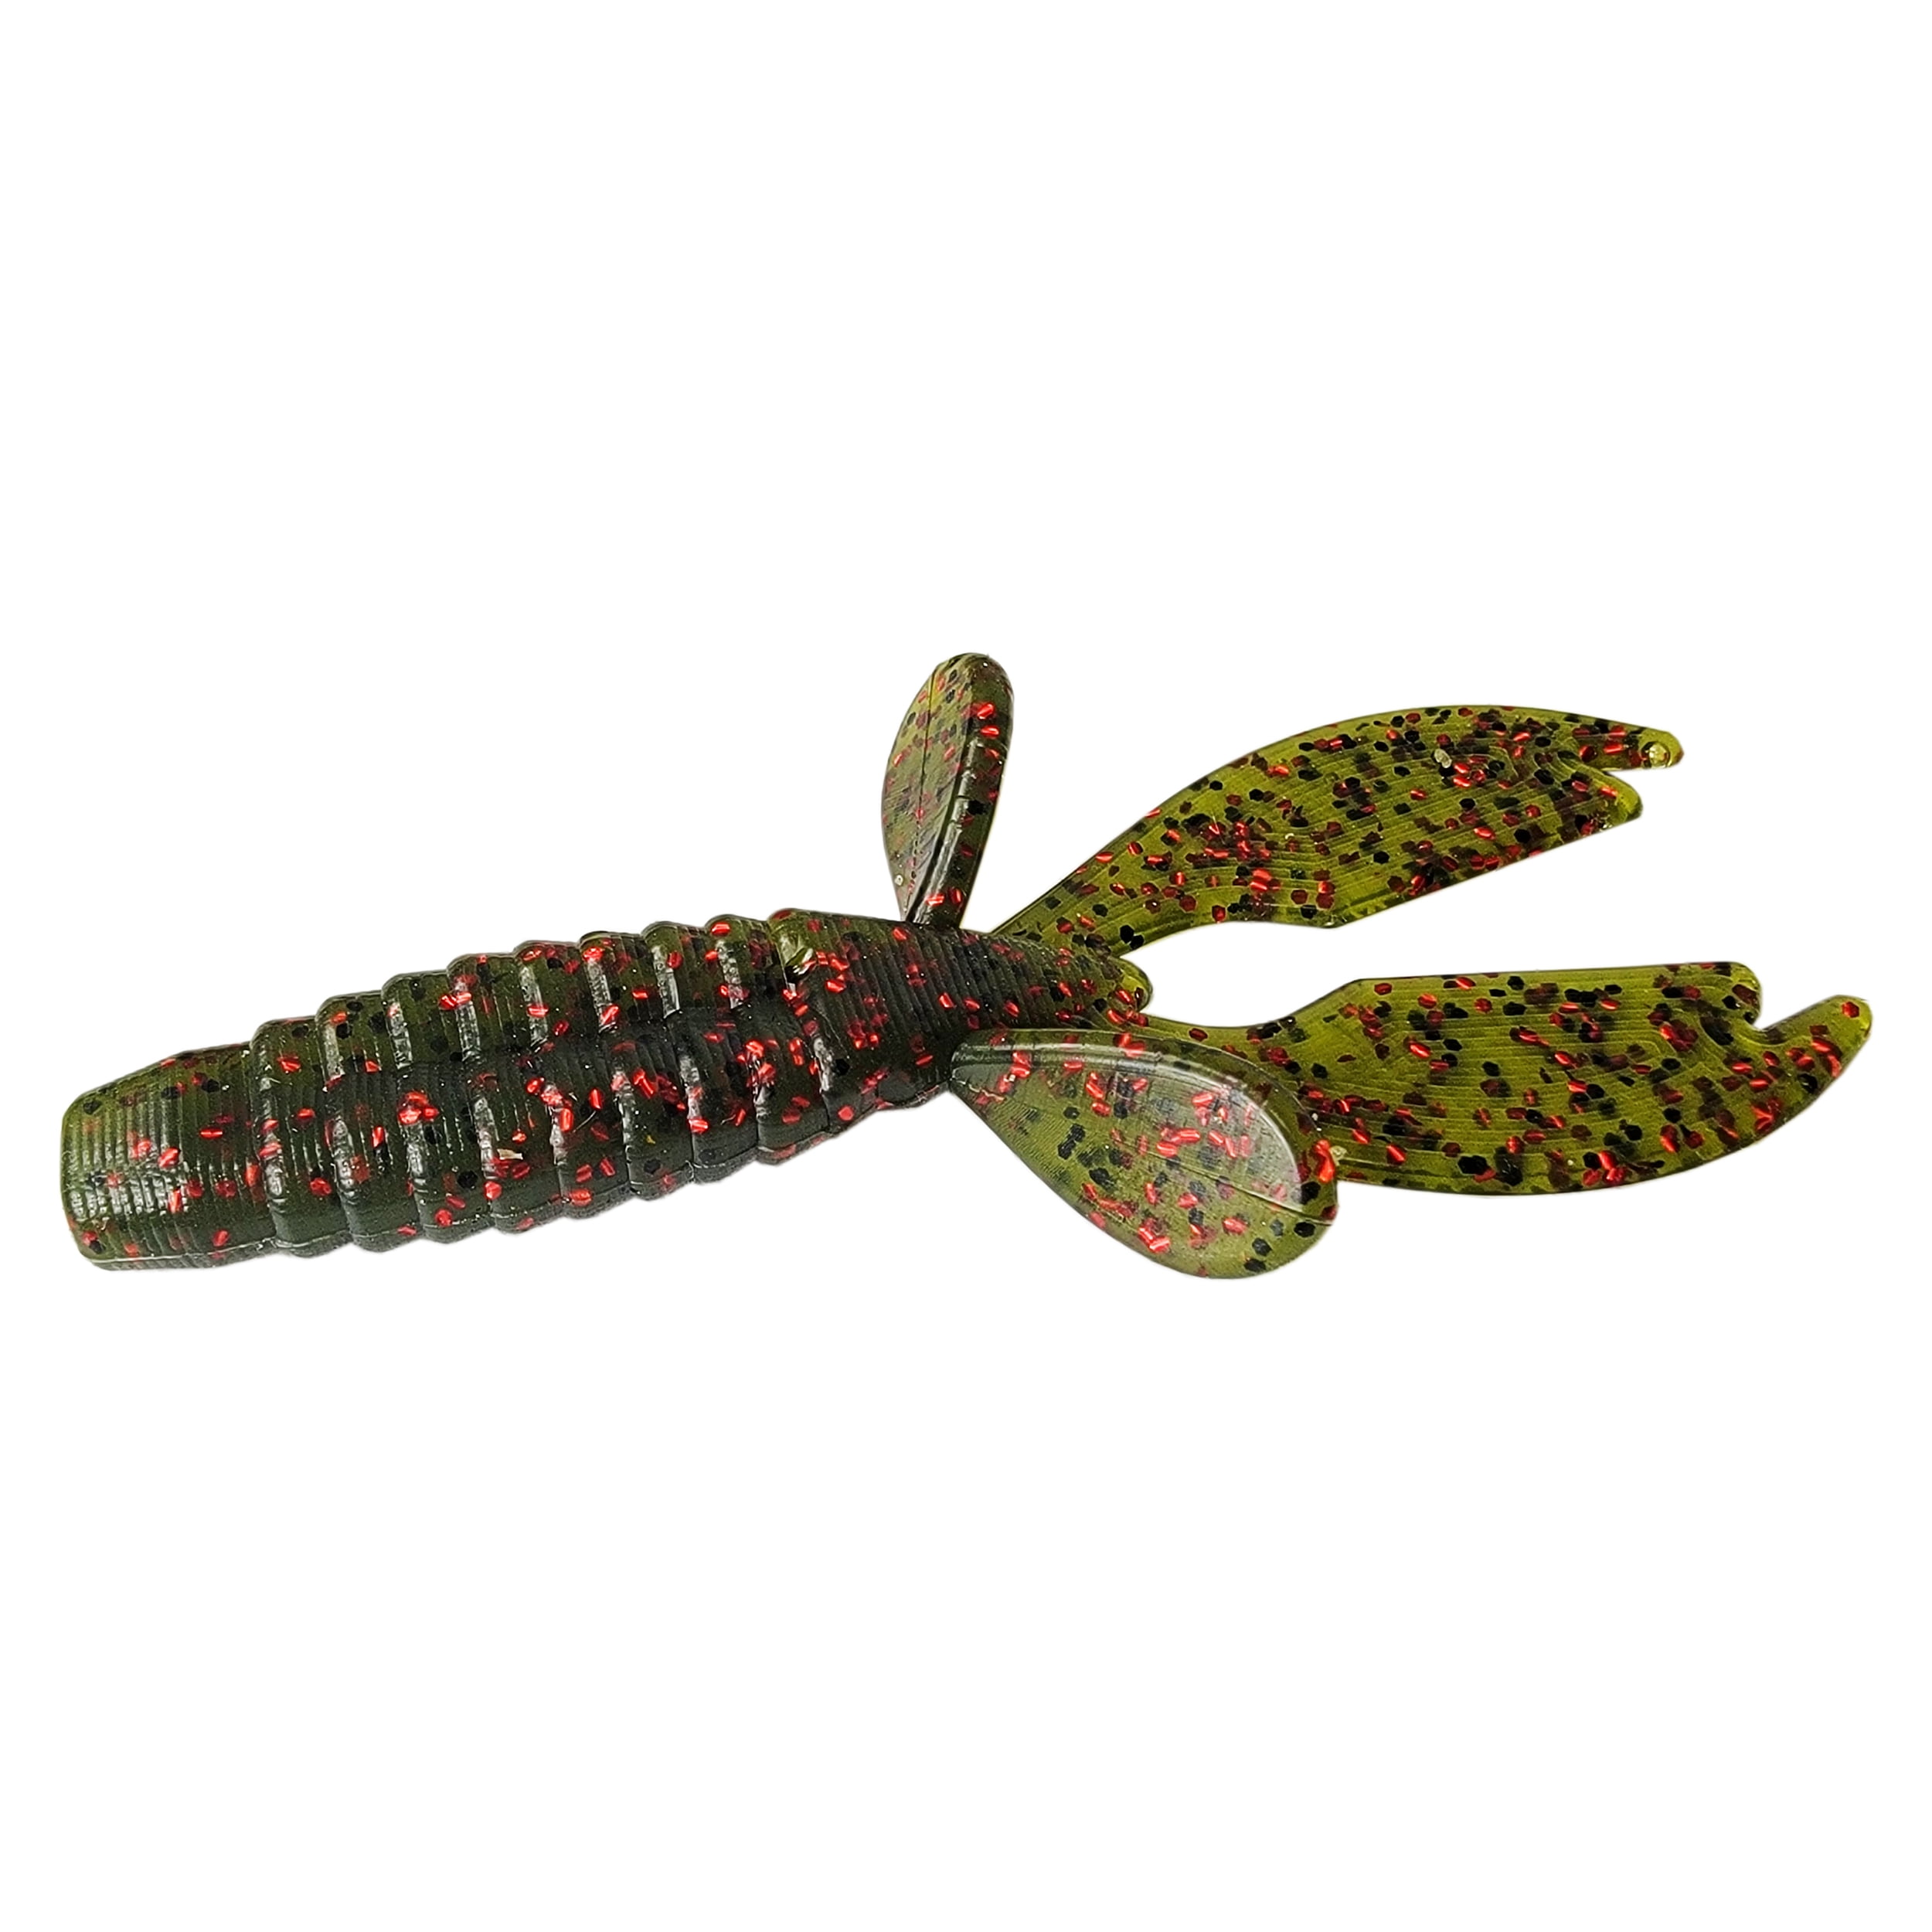 Tackle HD 10-Pack Texas Craw Beaver, 4.25 Twin Tail Fishing Bait, Soft  Plastic Fishing Lures and Jig Trailers for Bass Fishing, Crawfish Bass Lures,  Junebug 